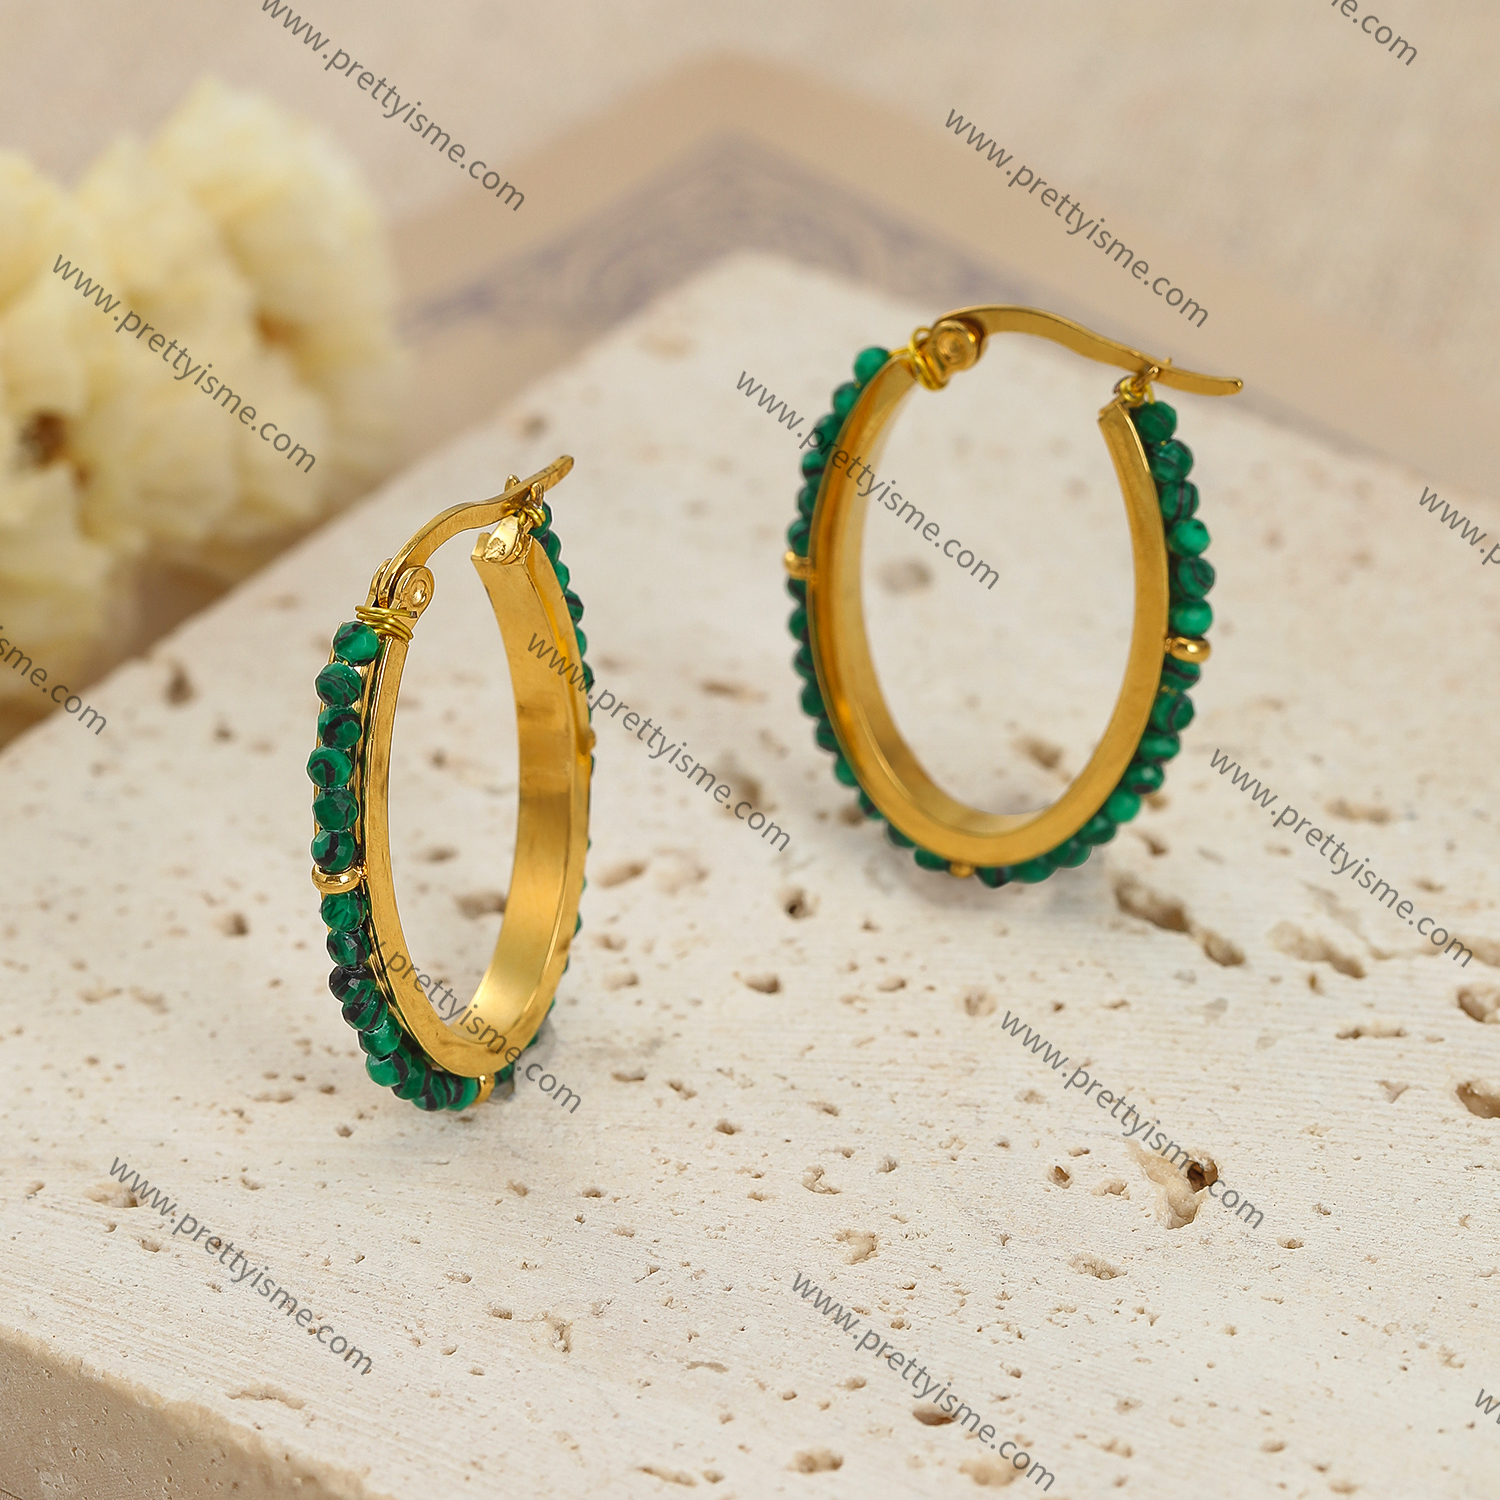 Pretty Is Me Collection New Design 18K Gold Plated 316L Stainless Steel Green Malachite Beads Clip On Hoop Earrings Women (2).webp